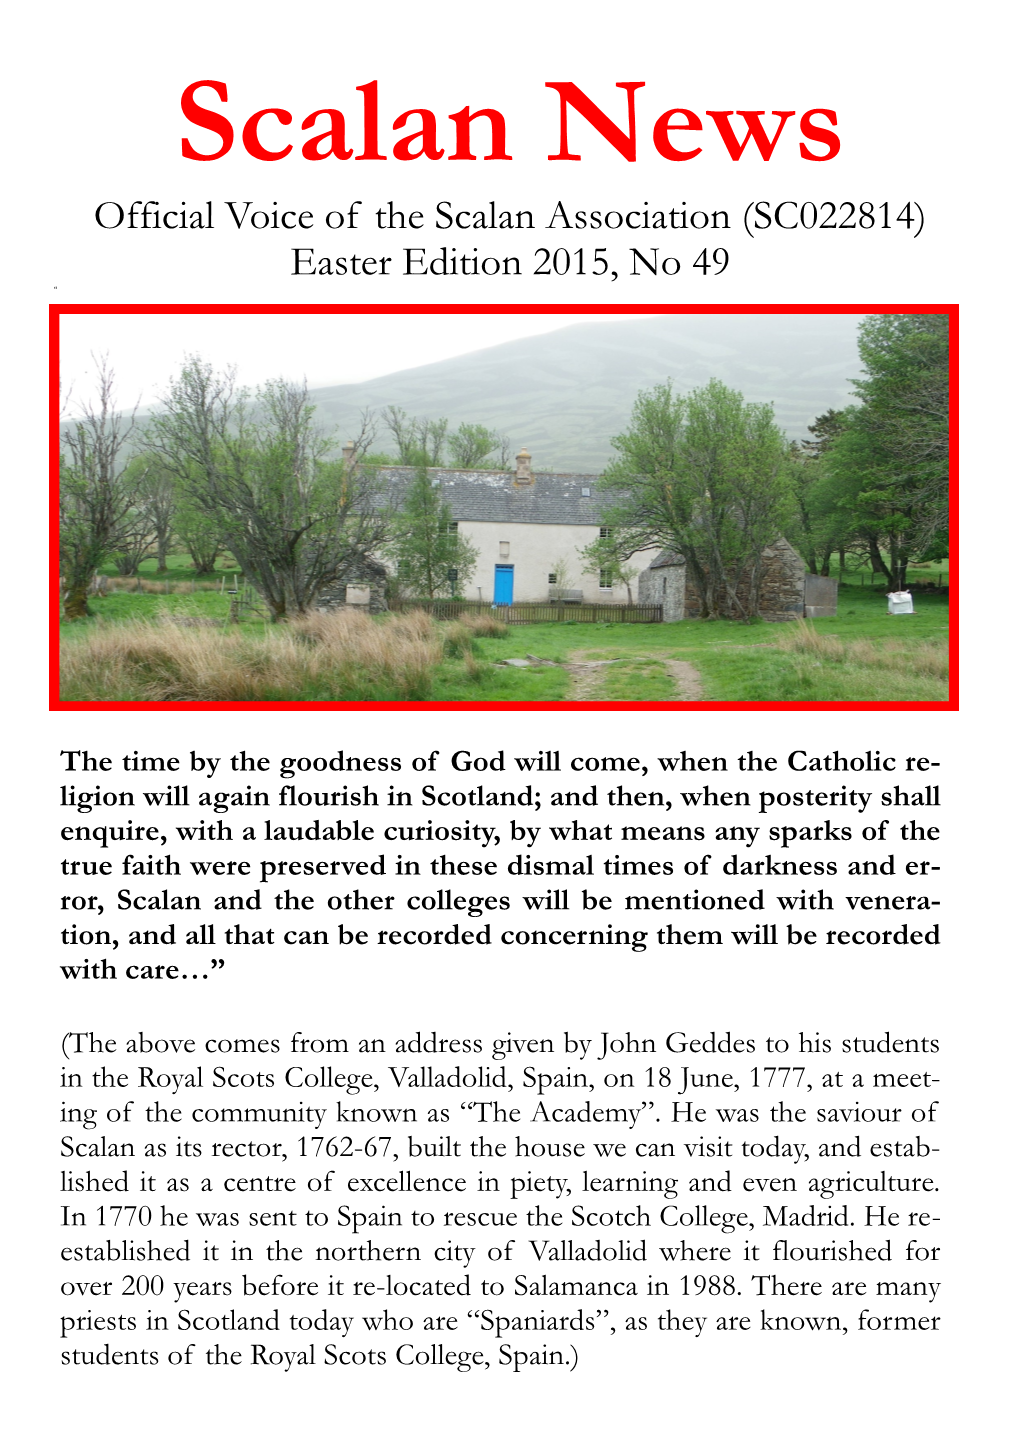 (SC022814) Easter Edition 2015, No 49